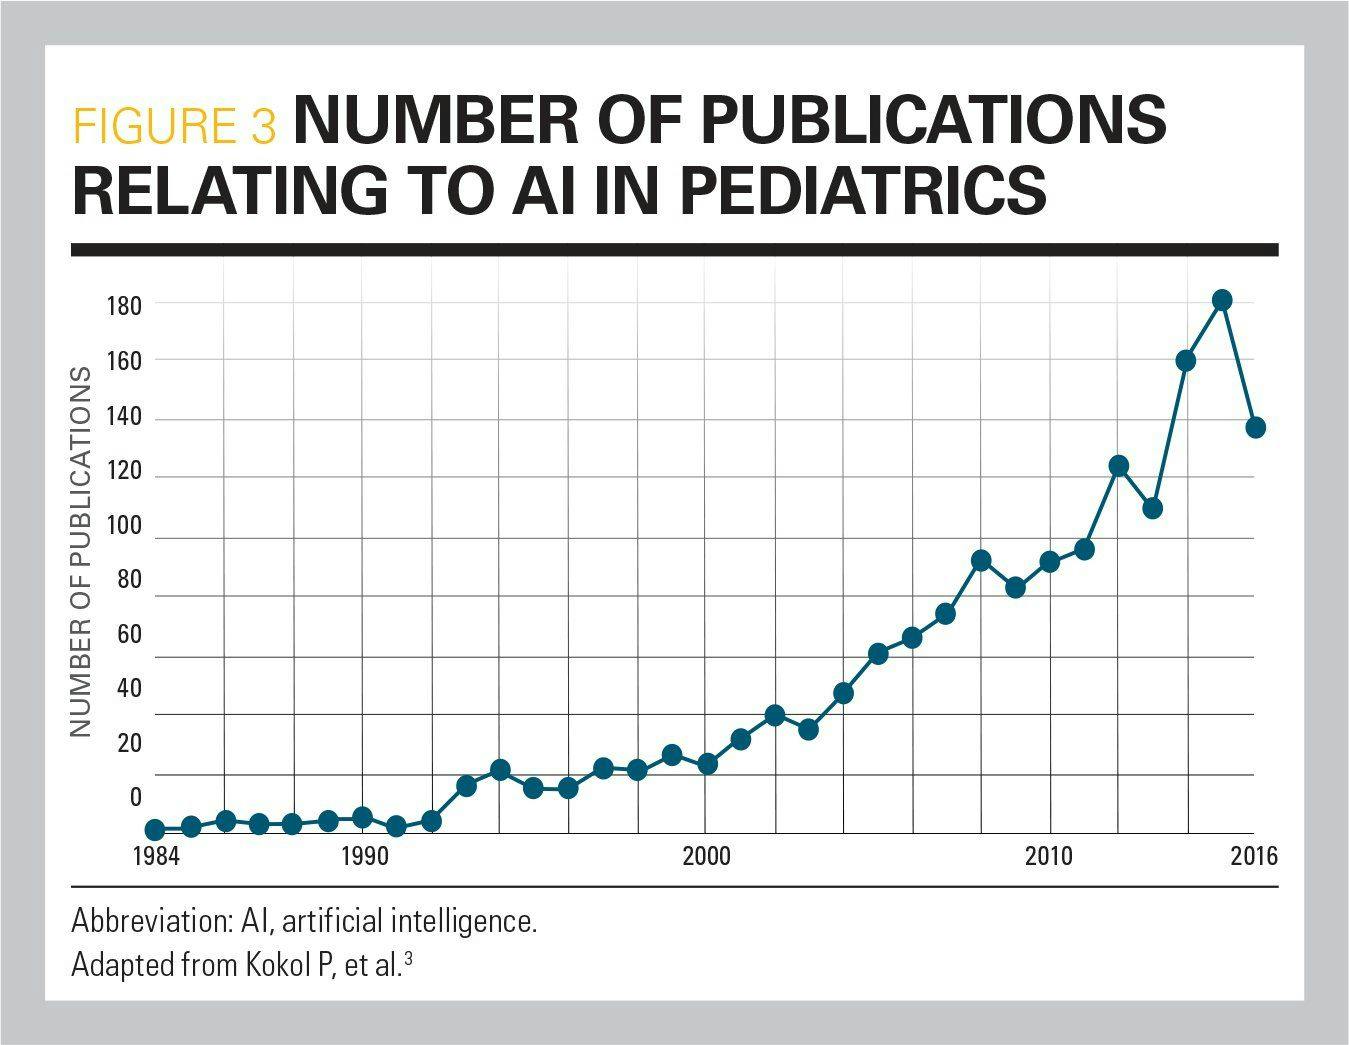 graph showing upward trend of number of publications relating to AI in pediatrics